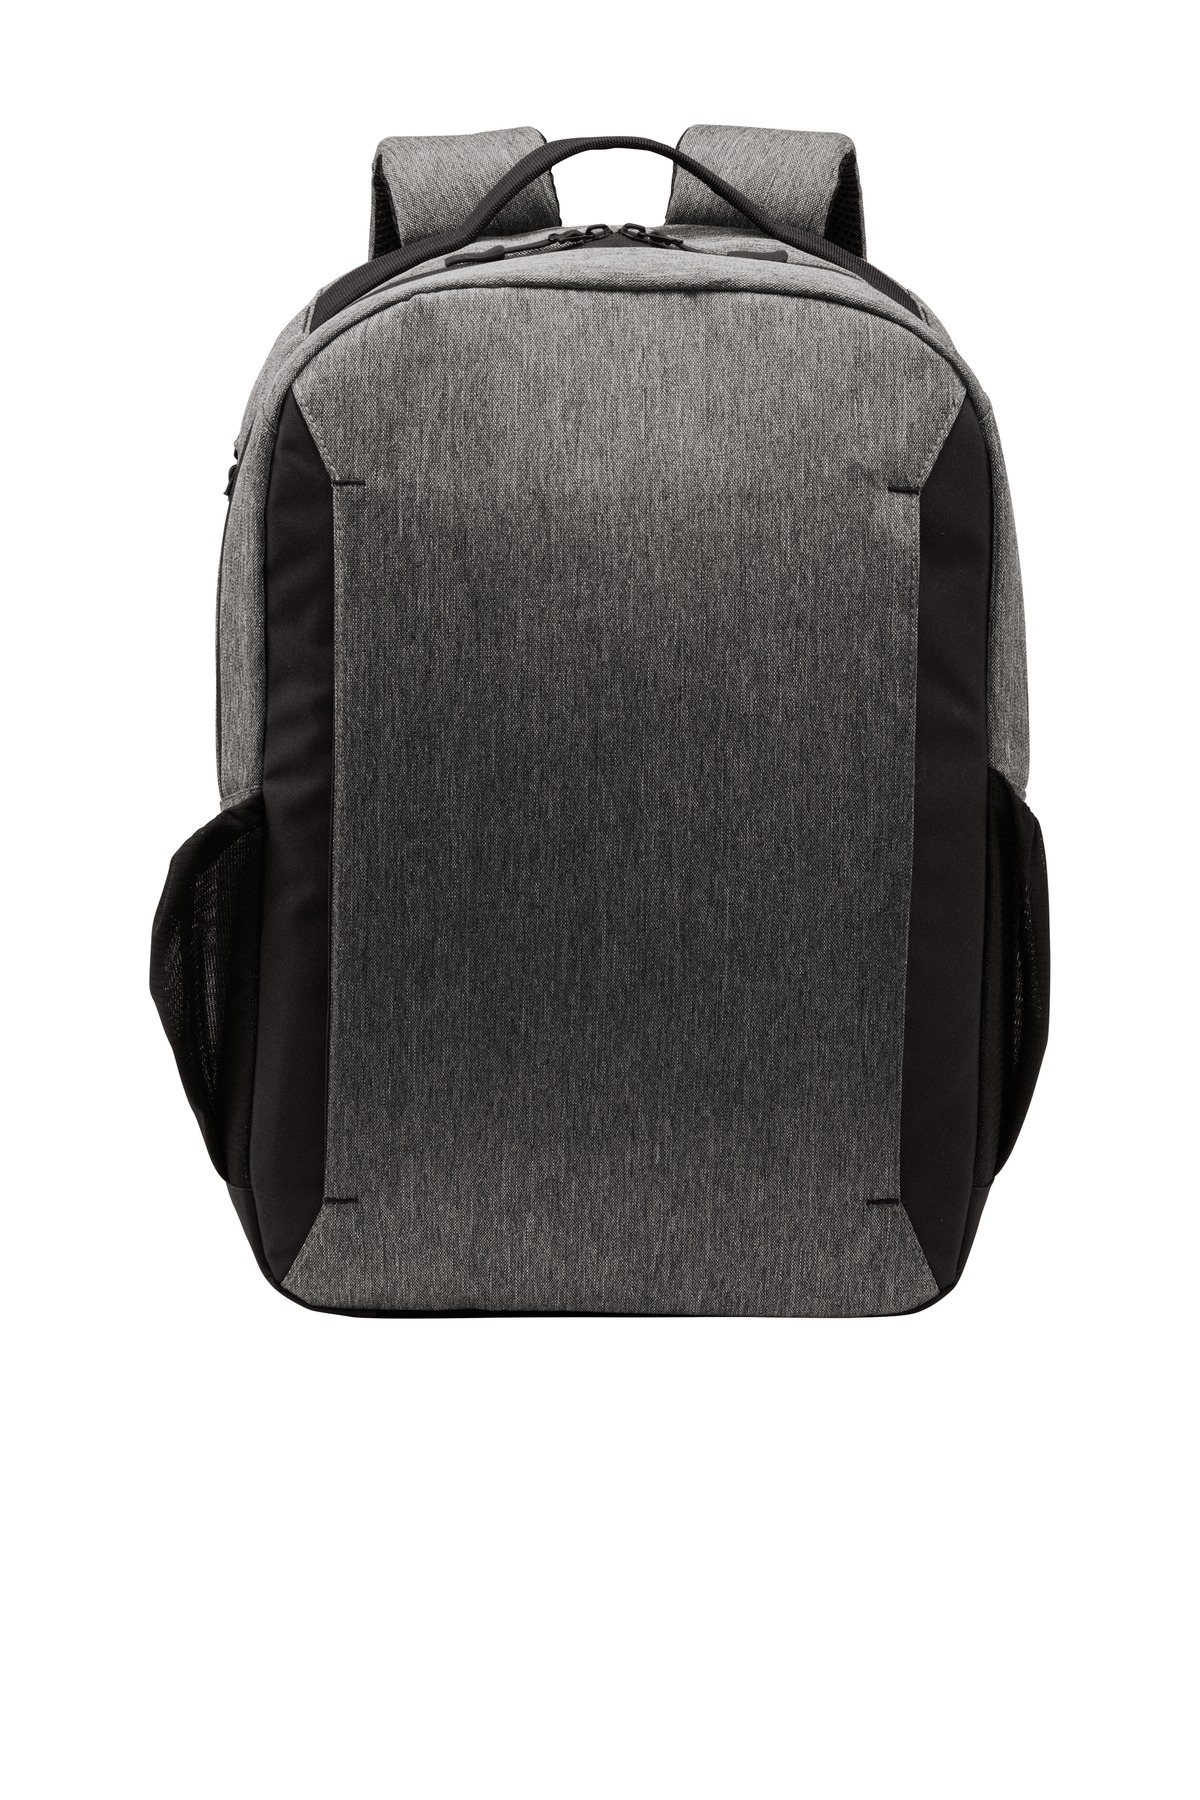 Port Authority Vector Backpack-Port Authority